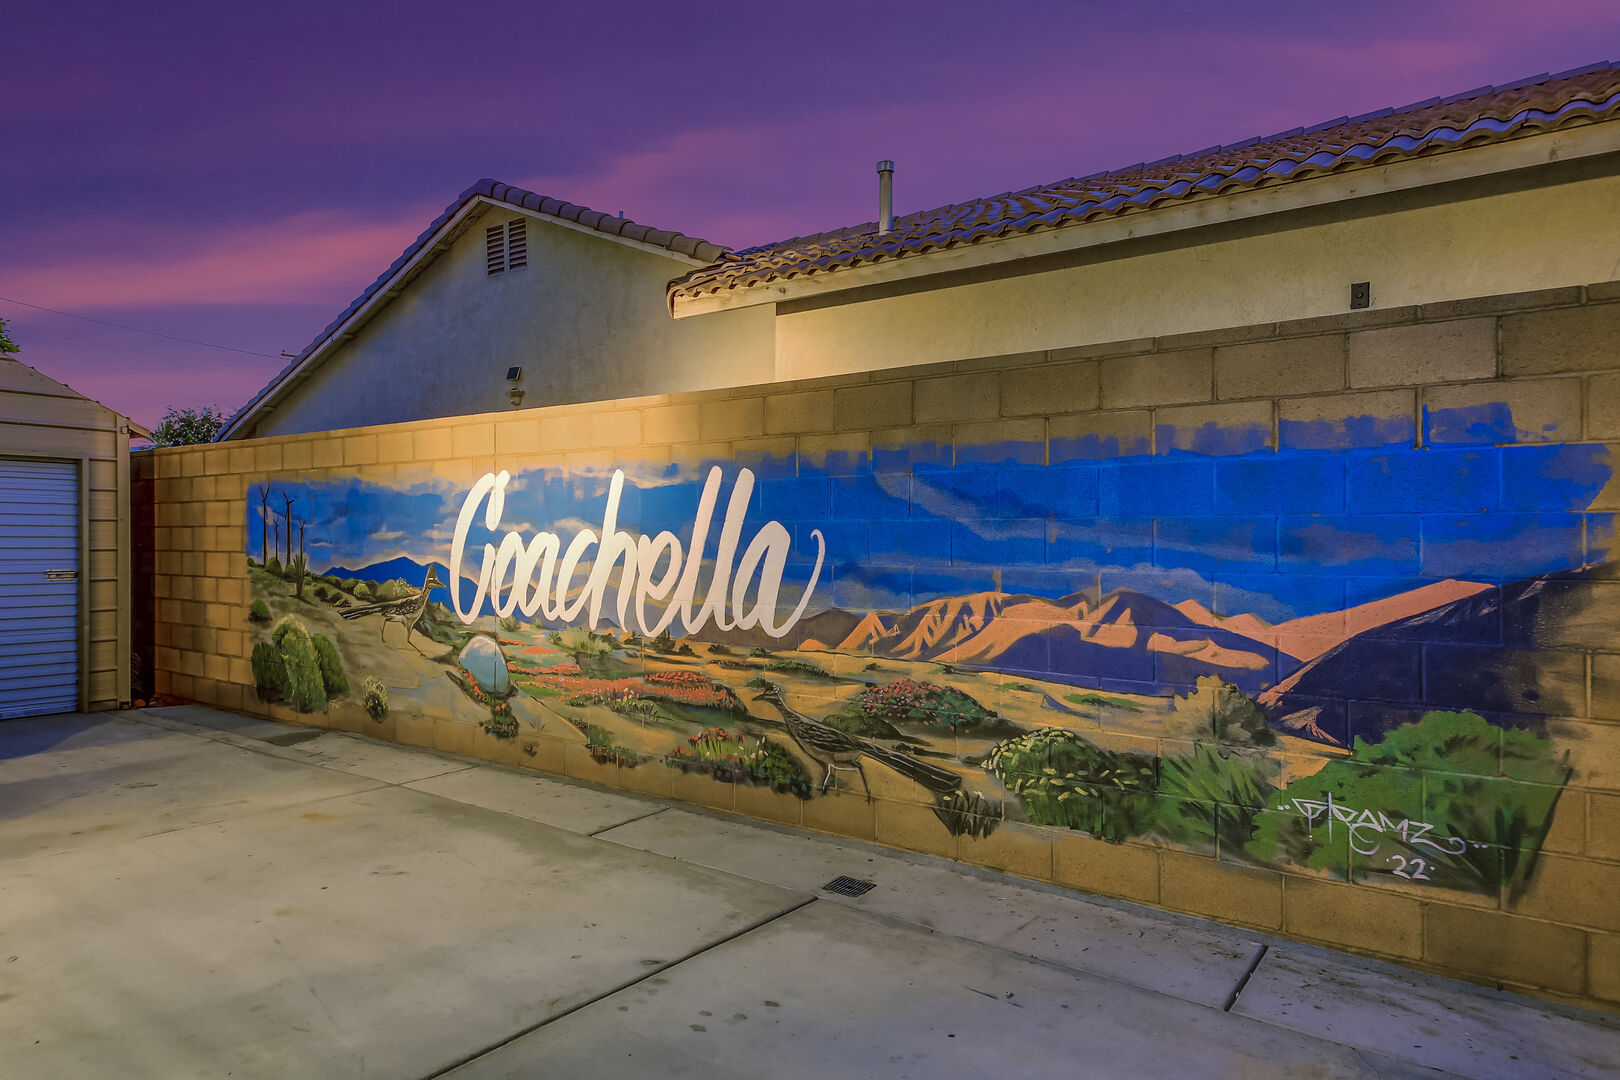 Don't forget to take a selfie in front of the hip Coachella mural!